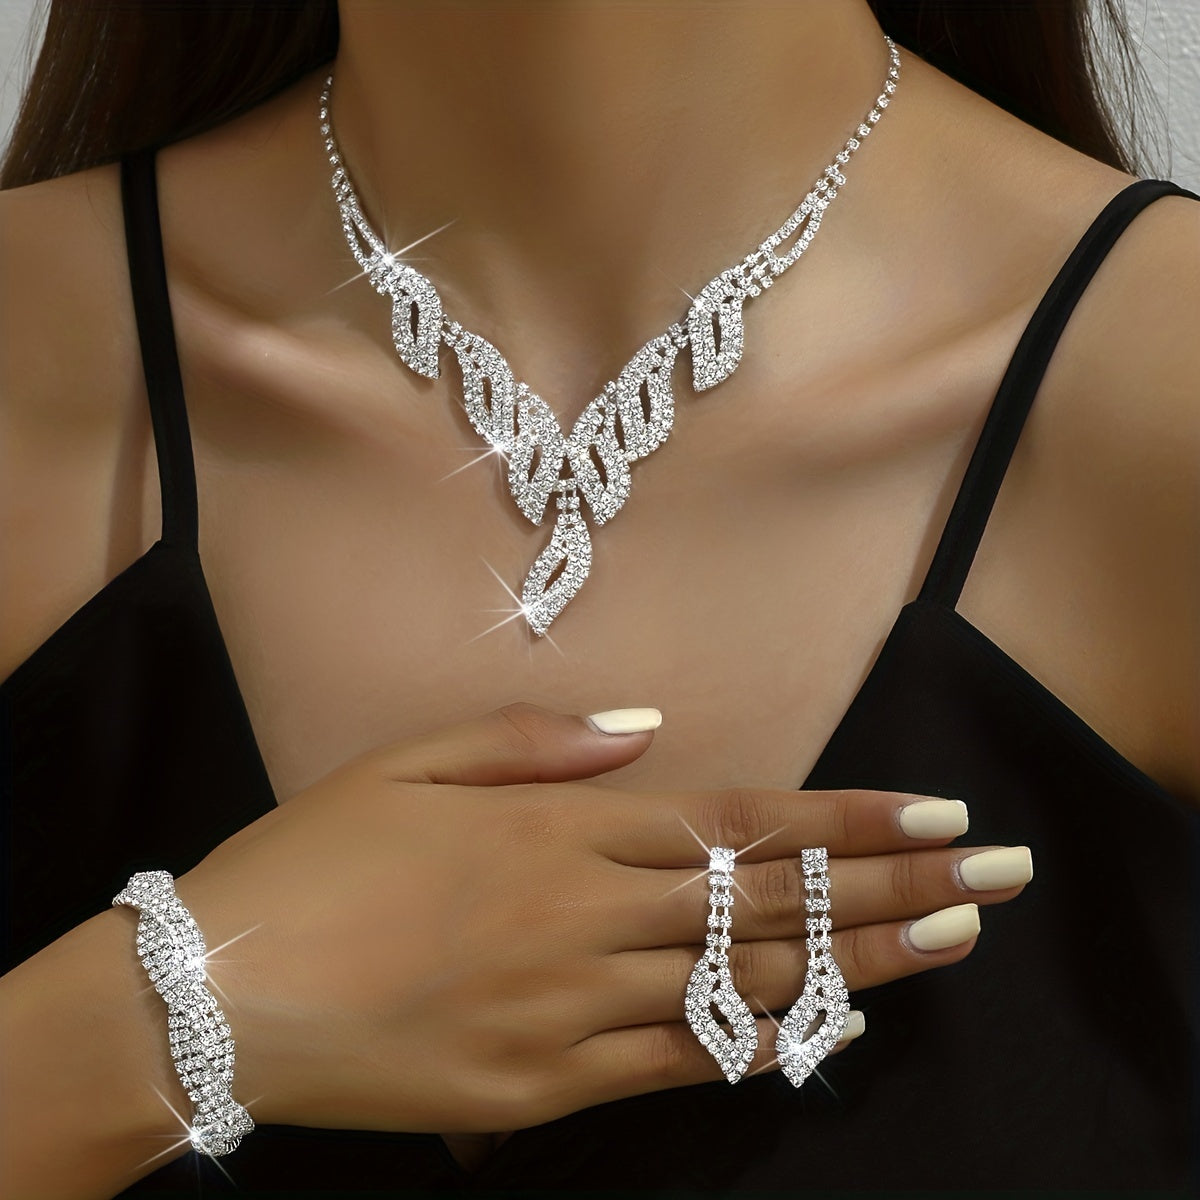 4pcs Necklace Earrings Plus Bracelet Elegant Jewelry Set Silver Plated Inlaid Rhinestone Dainty Evening Party Decor Perfect Chrismas Gift For Your Love